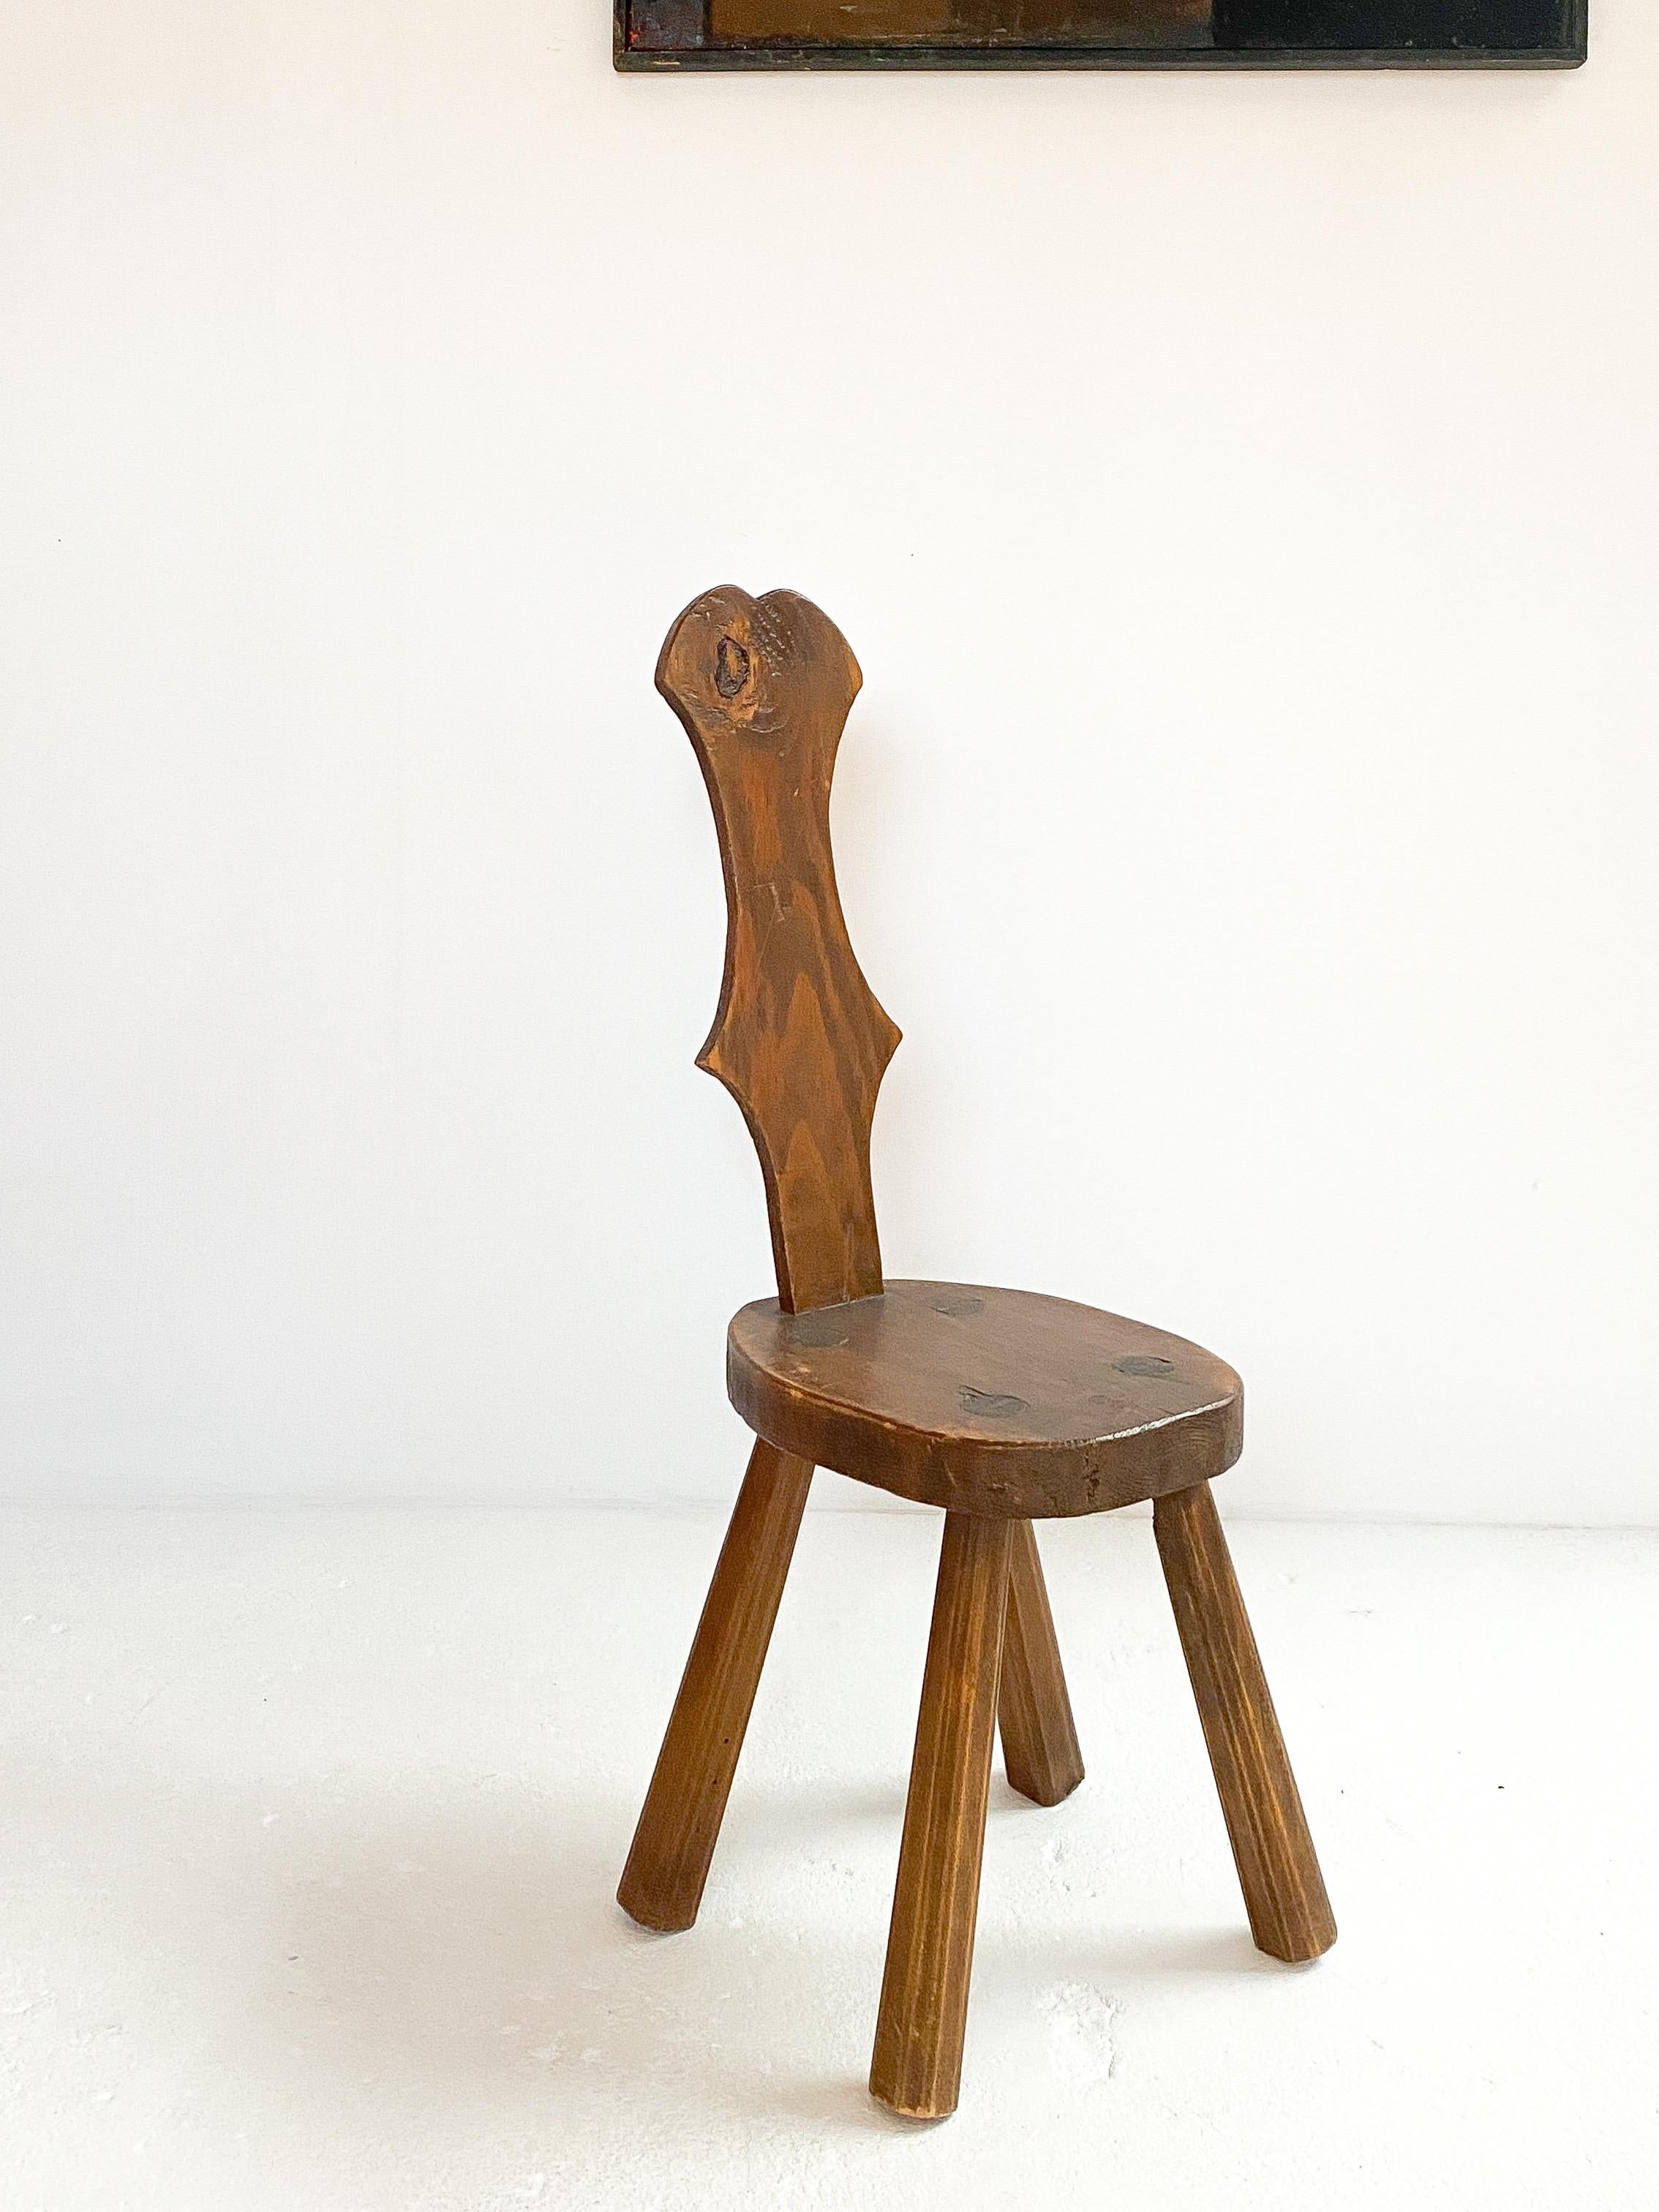 A light-brown, vintage Mid-Century stool made of hand carved and polished Pinewood, in good condition.

Brutalist wooden stool made in France, circa 1950s. 

Substantial and chunky seat with sturdy legs. This stool has an impressive violin